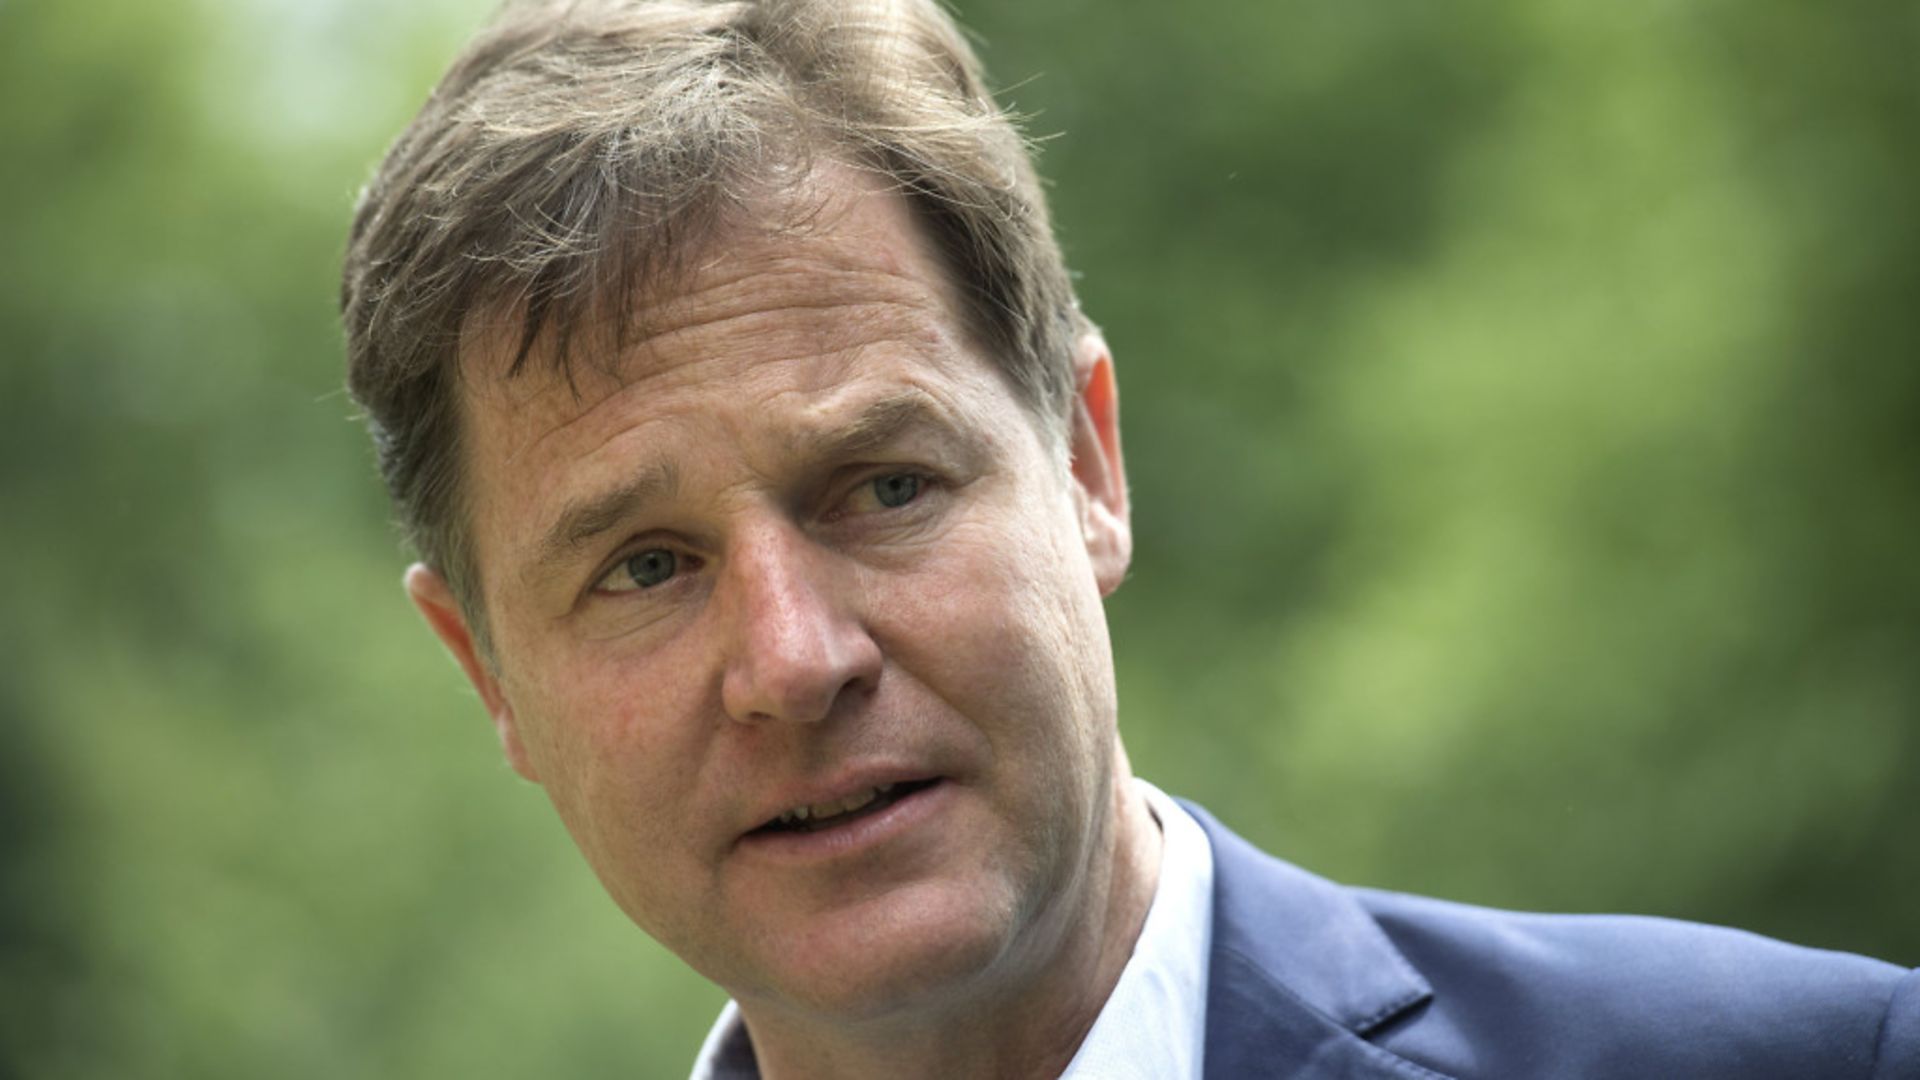 Former deputy prime minister Nick Clegg. Photo: PA Wire/PA Images